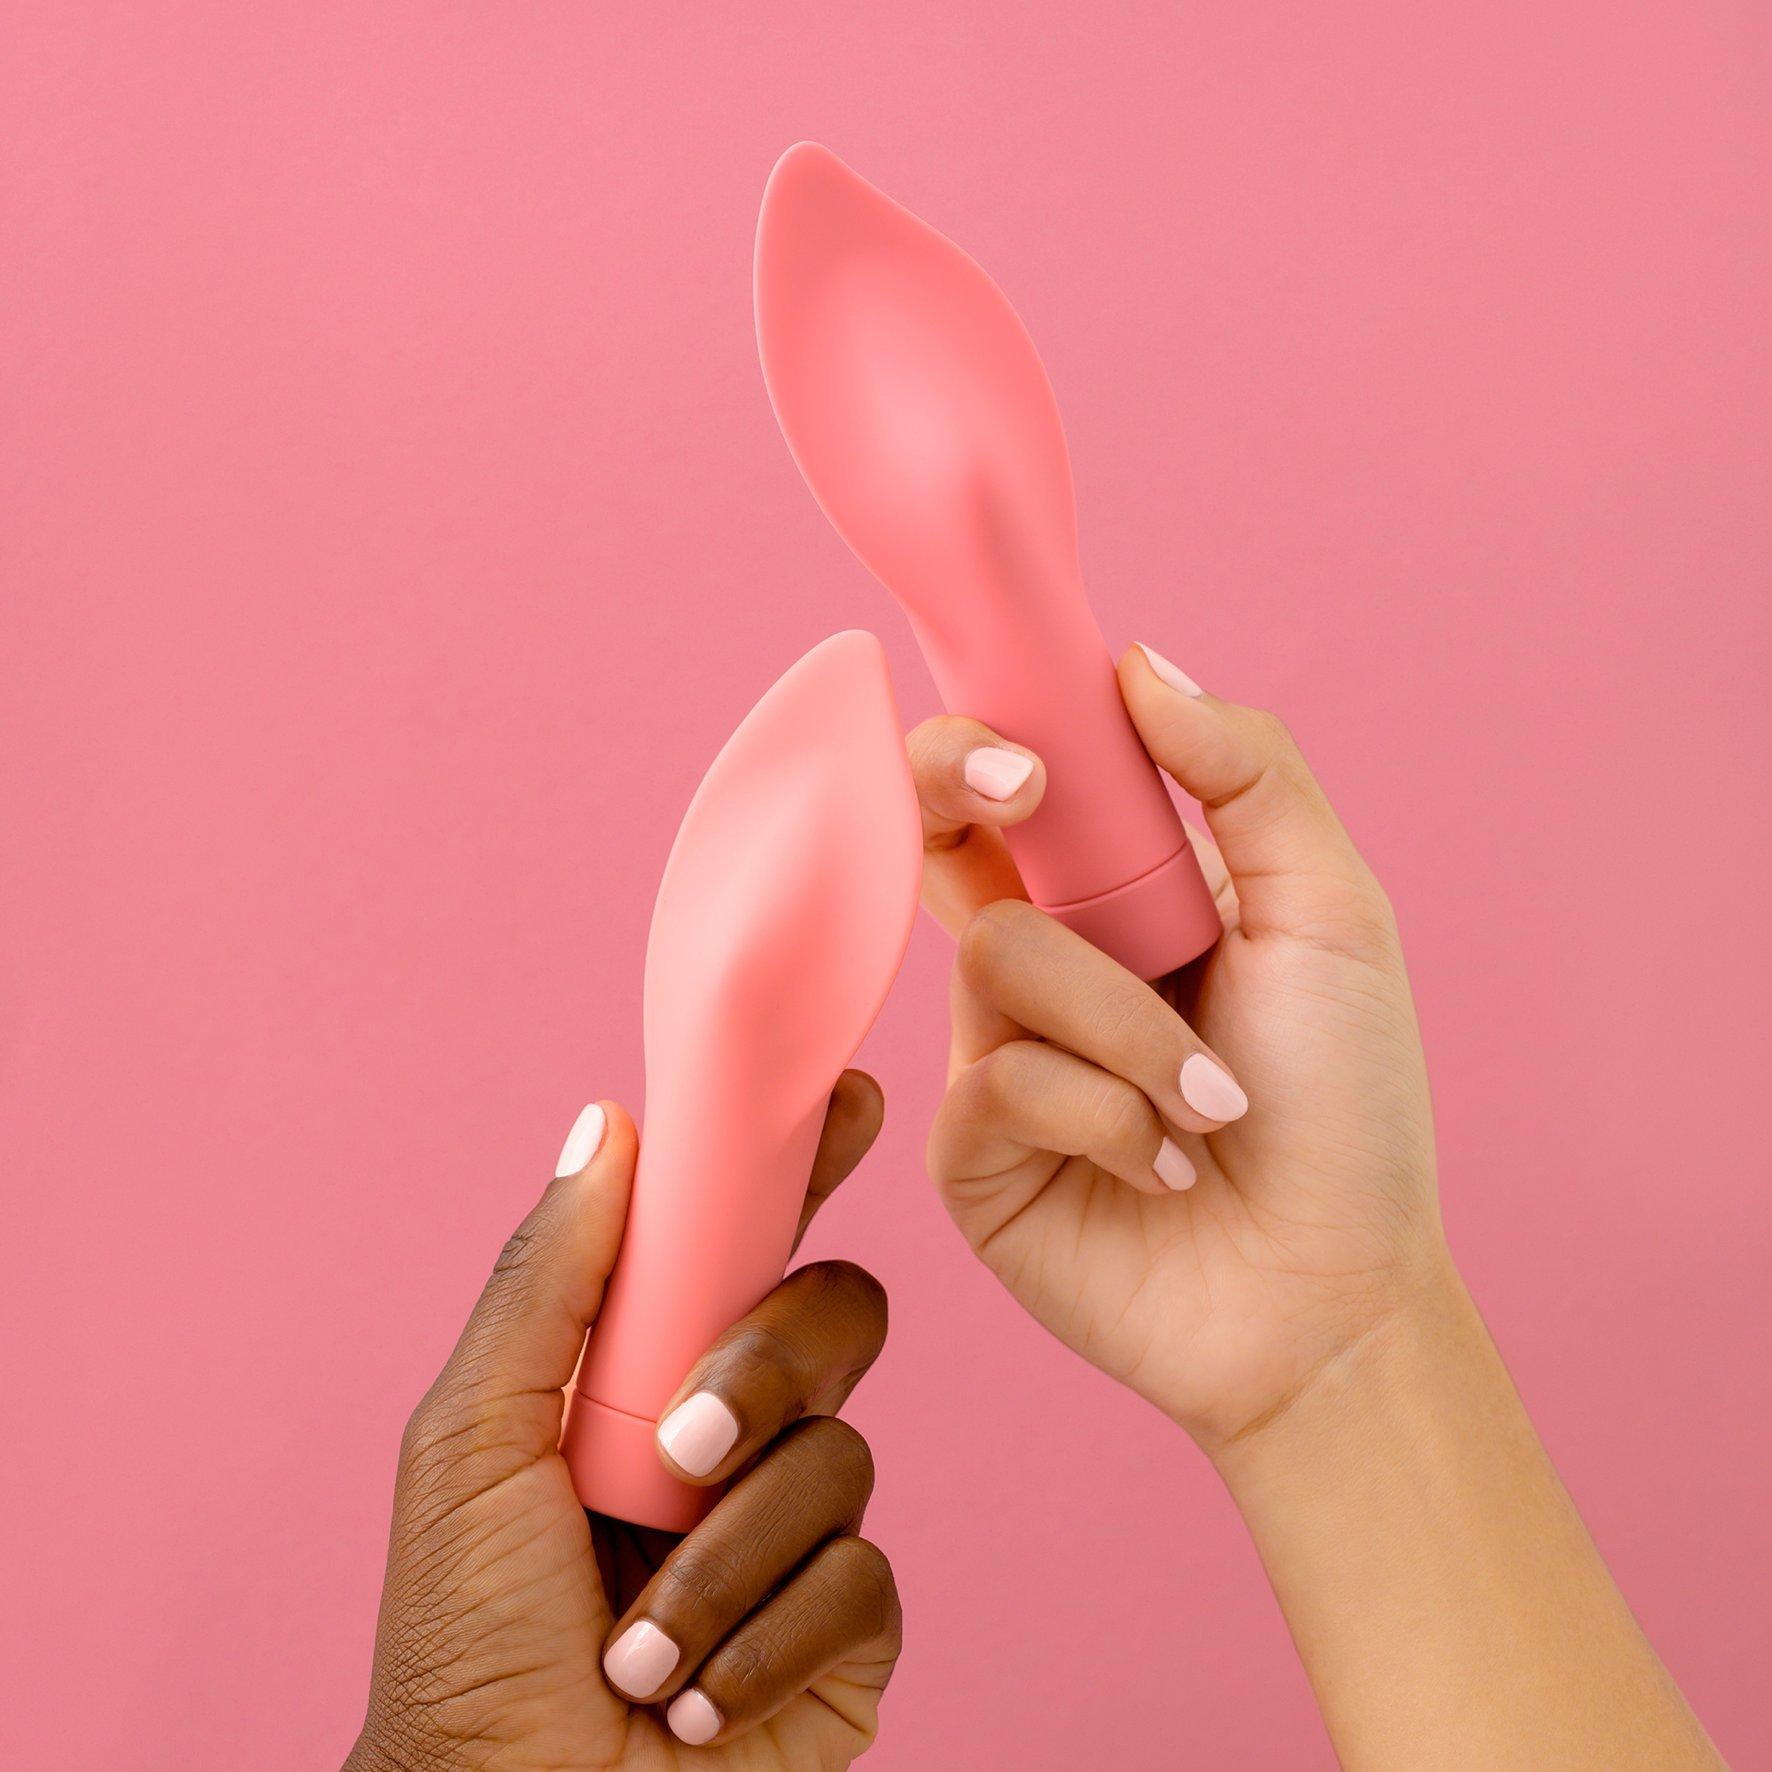 How to Choose a Vibrator Ulta Beauty picture